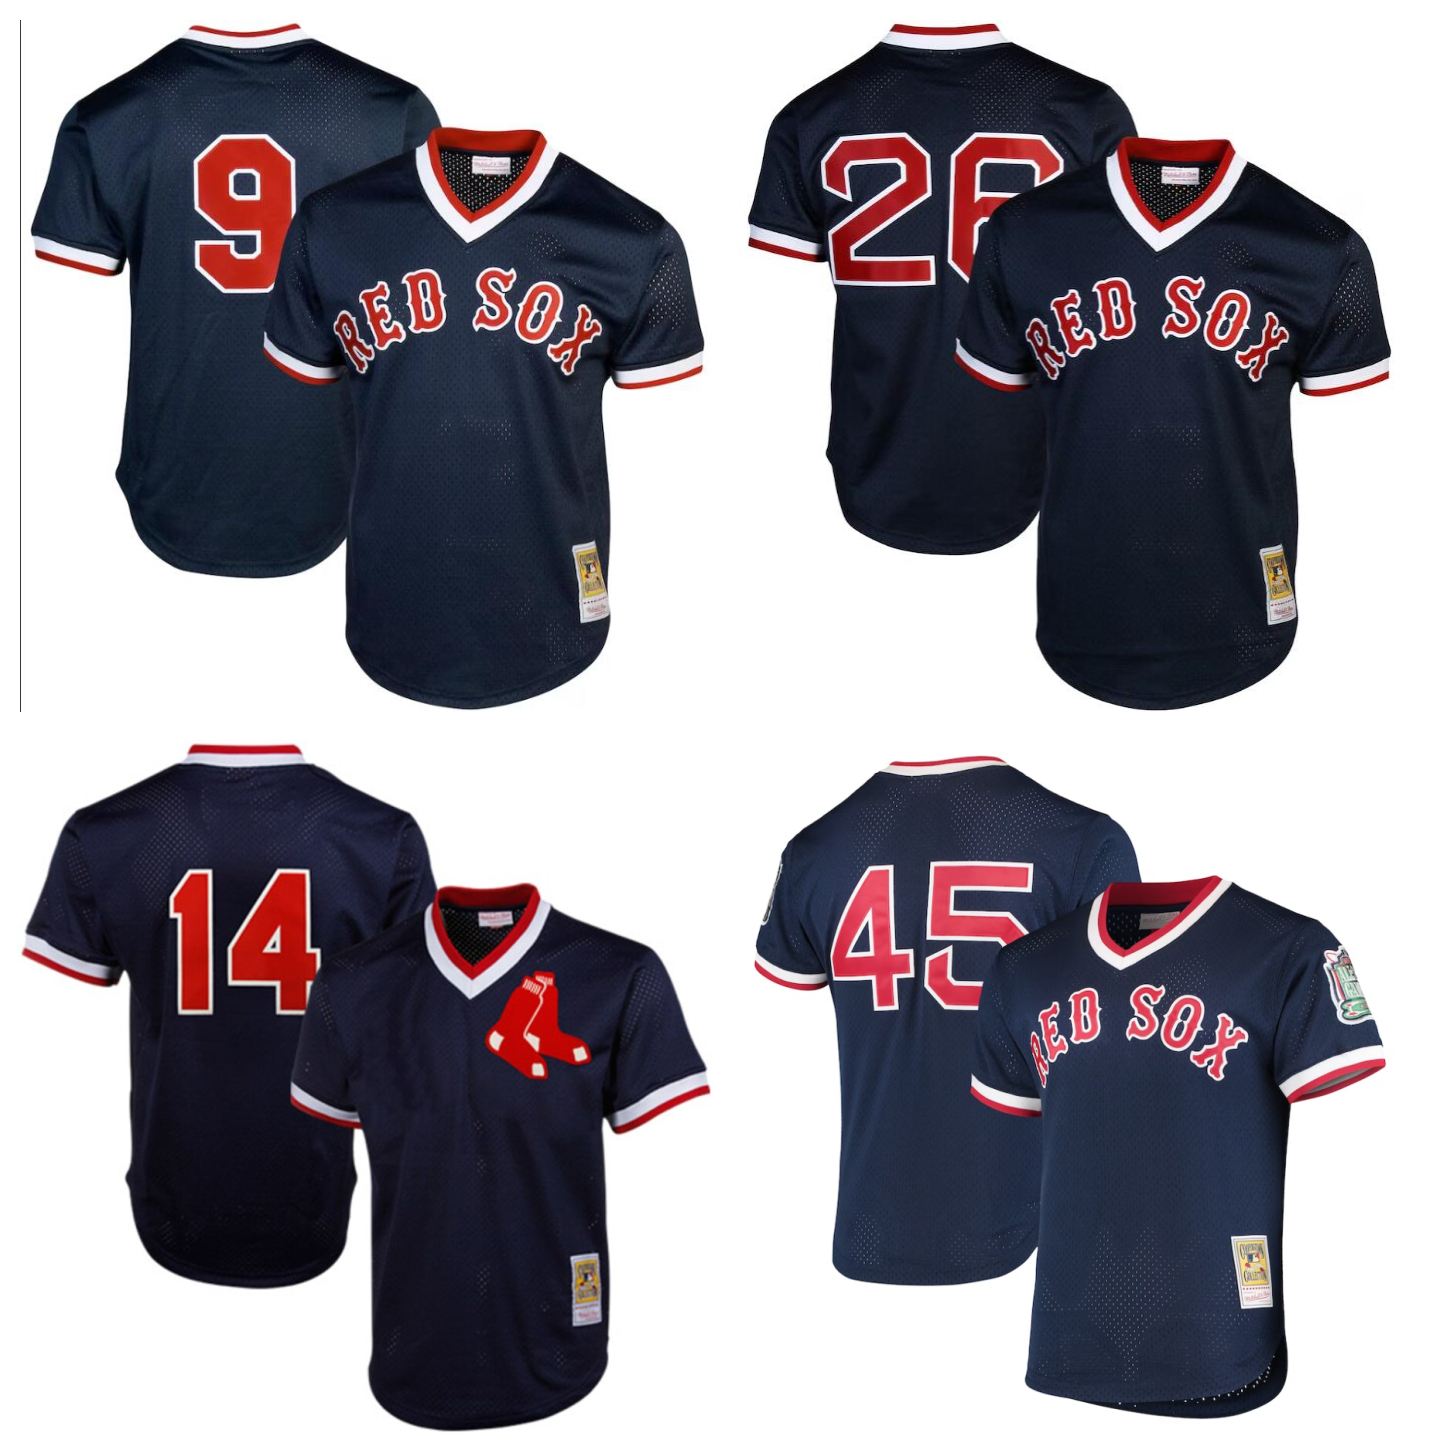 

Red Sox Mitchell Ness Baseball Jersey Boston Ted Williams Jim Rice Wade Boggs Pedro Martinez Cooperstown Mesh Batting Practice Jersey Red Blue Custom Size S-4XL, As pic